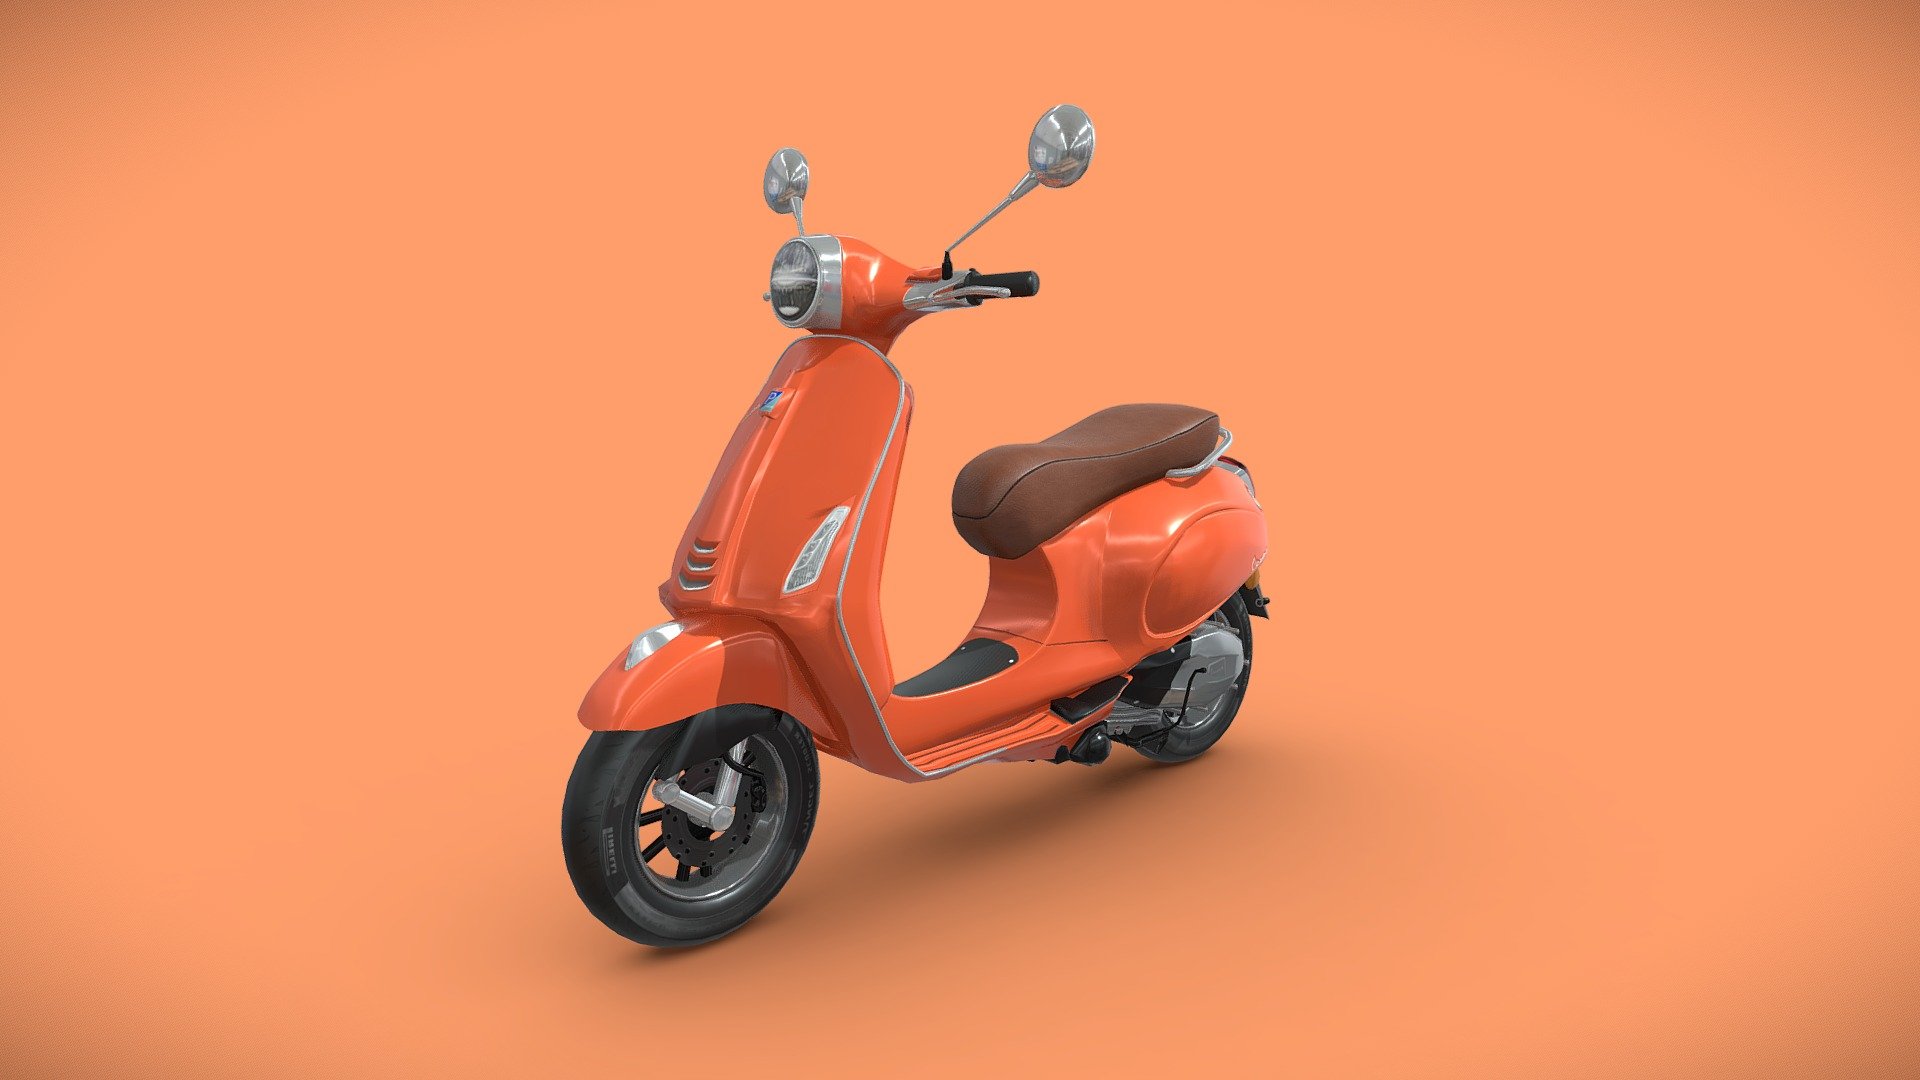 This is Vespa Primavera 150 model of Scooty 3d Model.

This is in Arancio Impulsivo Color of  Vespa Primavera 150.

The model was created in Maya 2018, rendered with Substance painter, Clean topology based on quads. Detailed High quality model.

All Materials in this pack are provide with all named.

Model Type: Polygonal
Polygons: 18,341
Vertices: 18,897
Formats available: Maya ASCII 2018, Maya Binary 2018, FBX , OBJ
Textures: Color, Normal, Metallic, Roughness, Ambient Occlusion, Curvature and Thickness
Texture Resolution: 4096 x 4096 pixels

If the price is not suitable for you can contact me and discuss the price.

Please don't forget to rate the model.

Hope you like it!

Thank You 3d model